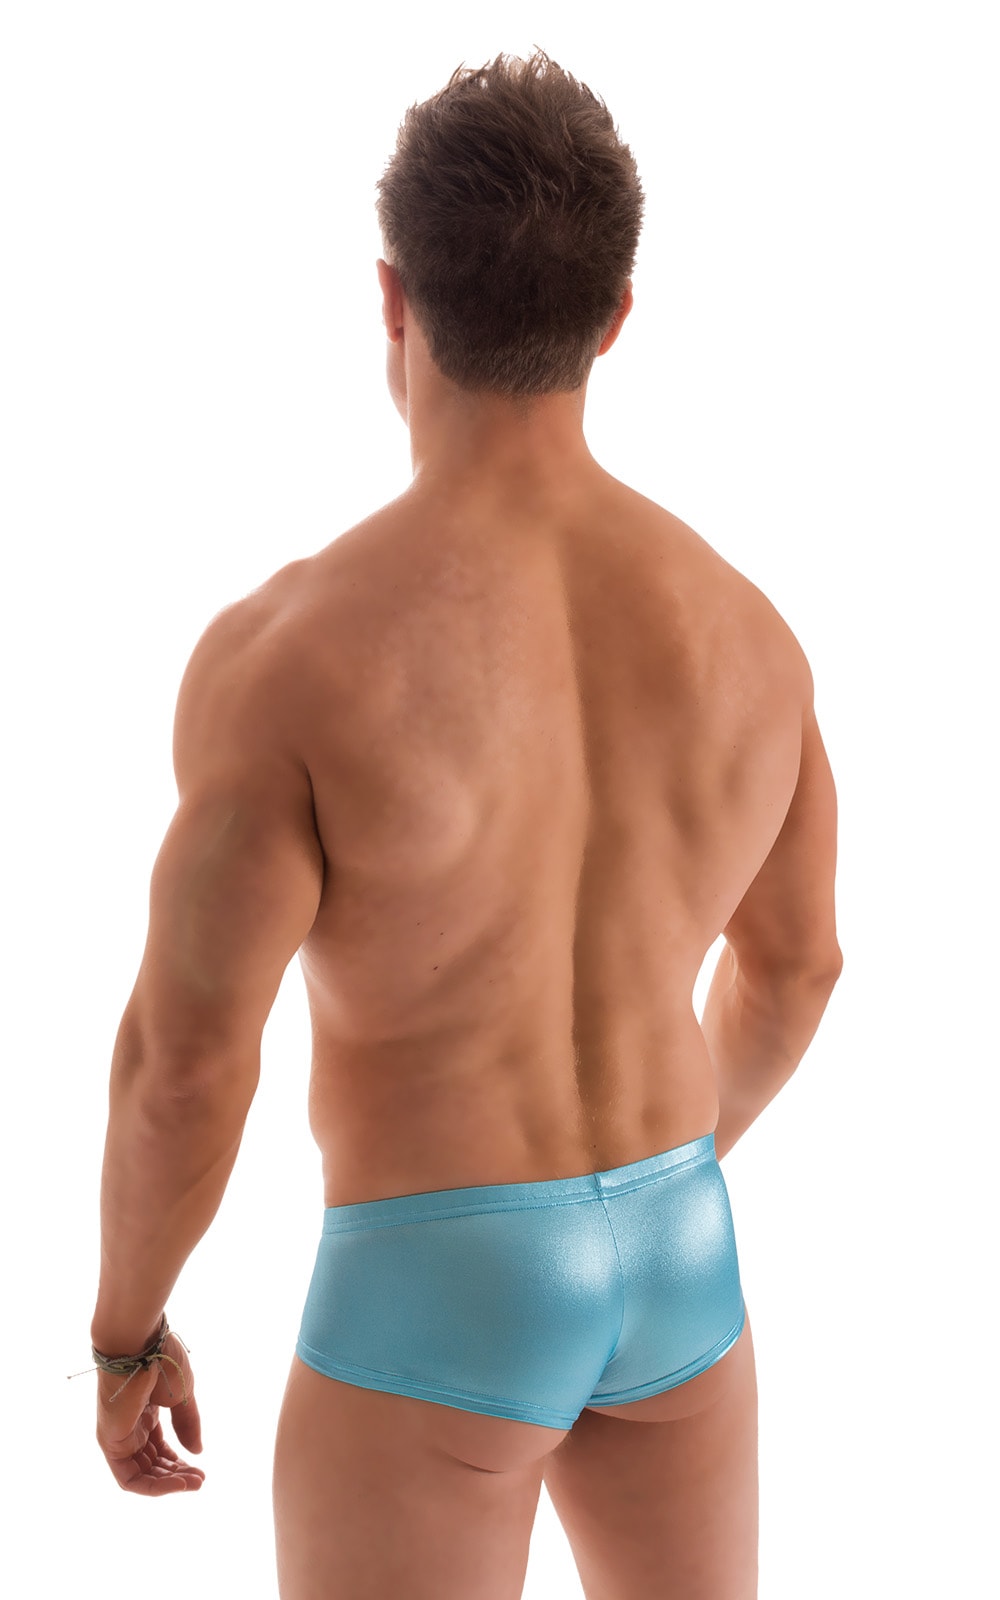 Pouch Enhanced Micro Square Cut Swim Trunks in Ice Karma Turquoise Shimmer, Rear View